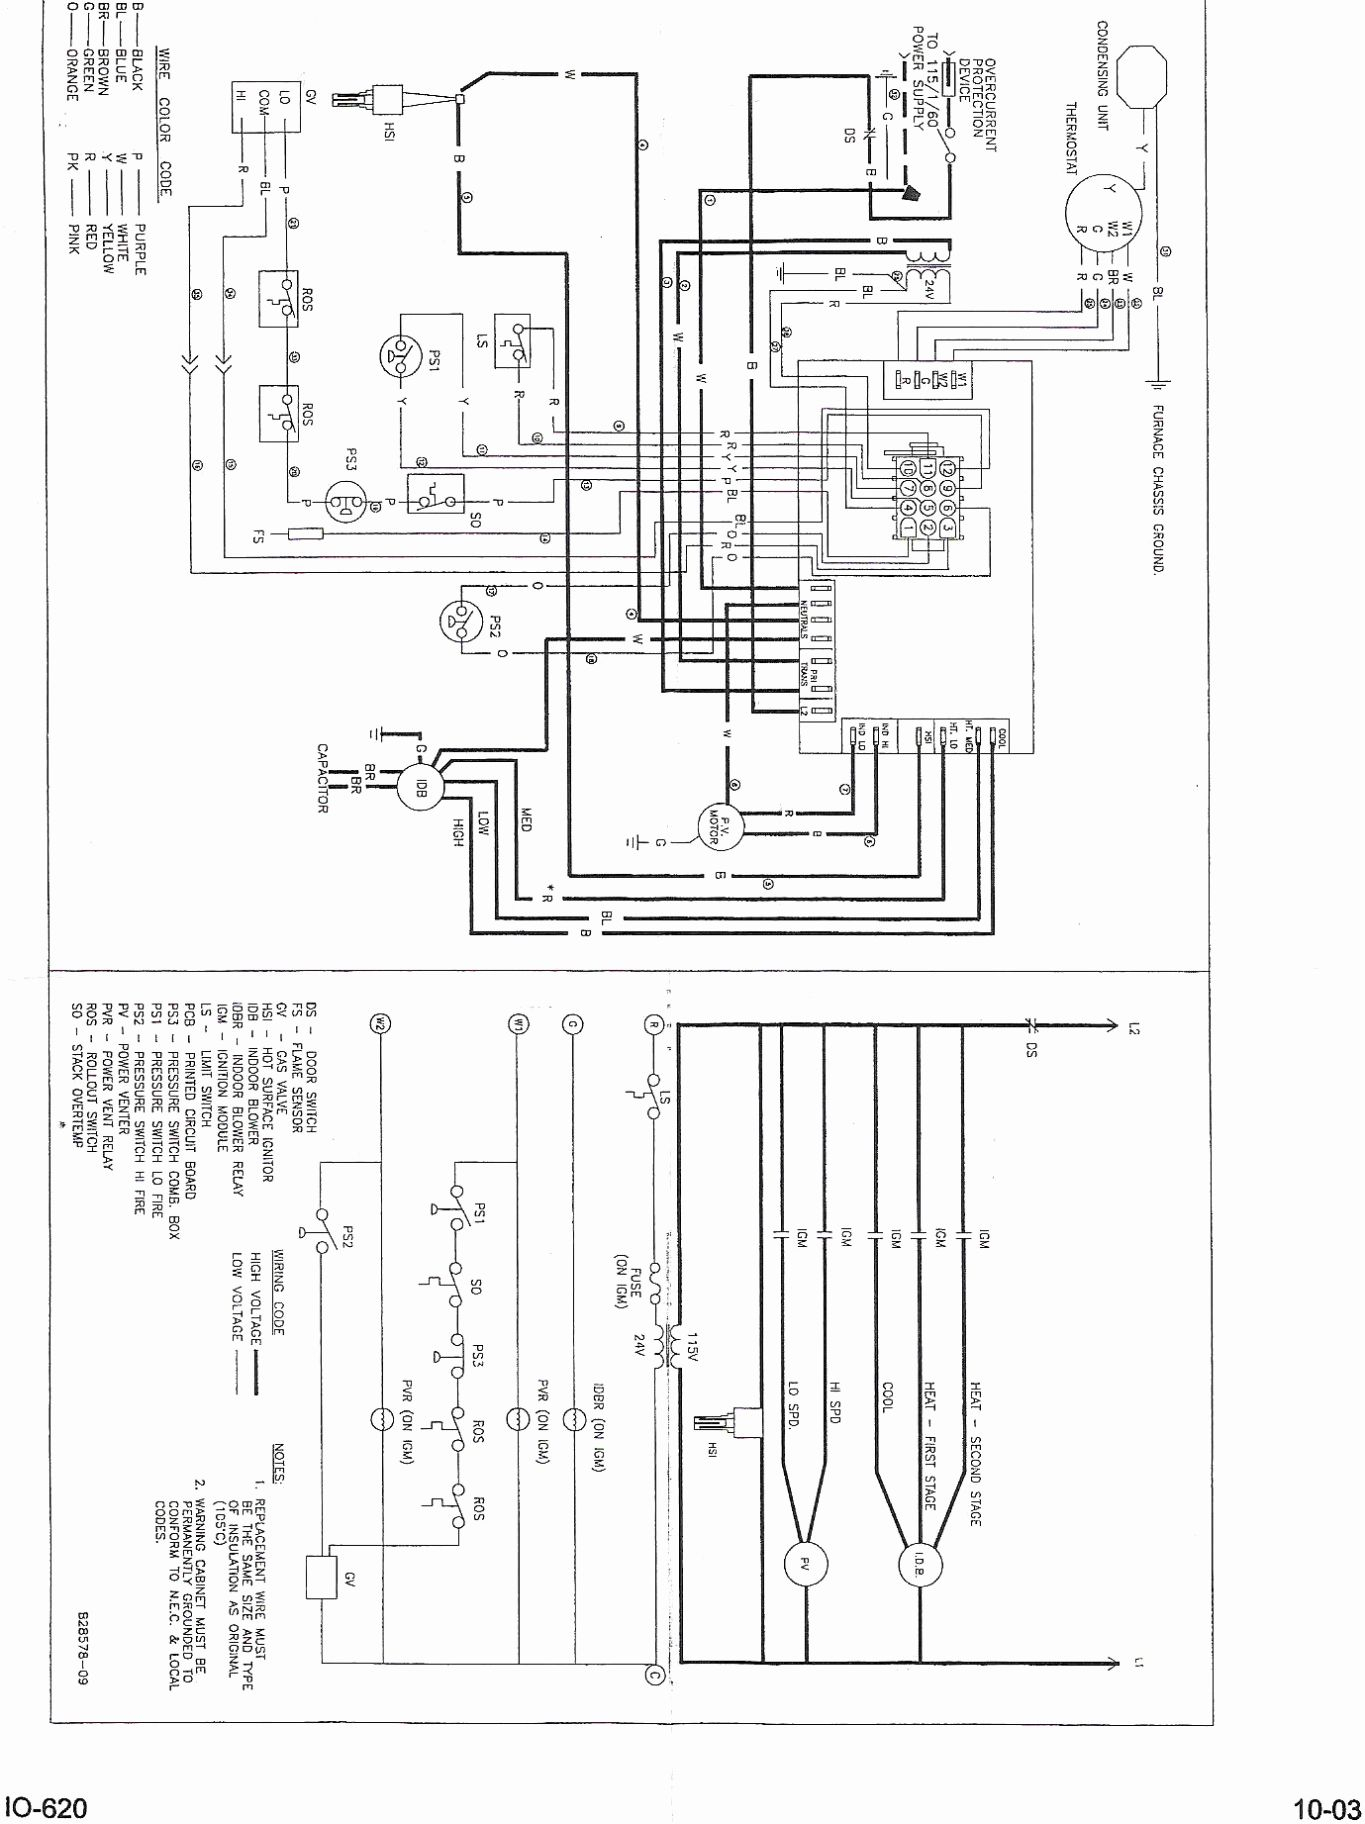 Wiring Diagram For A Goodman Furnace - All Wiring Diagram Data - Goodman Furnace Wiring Diagram